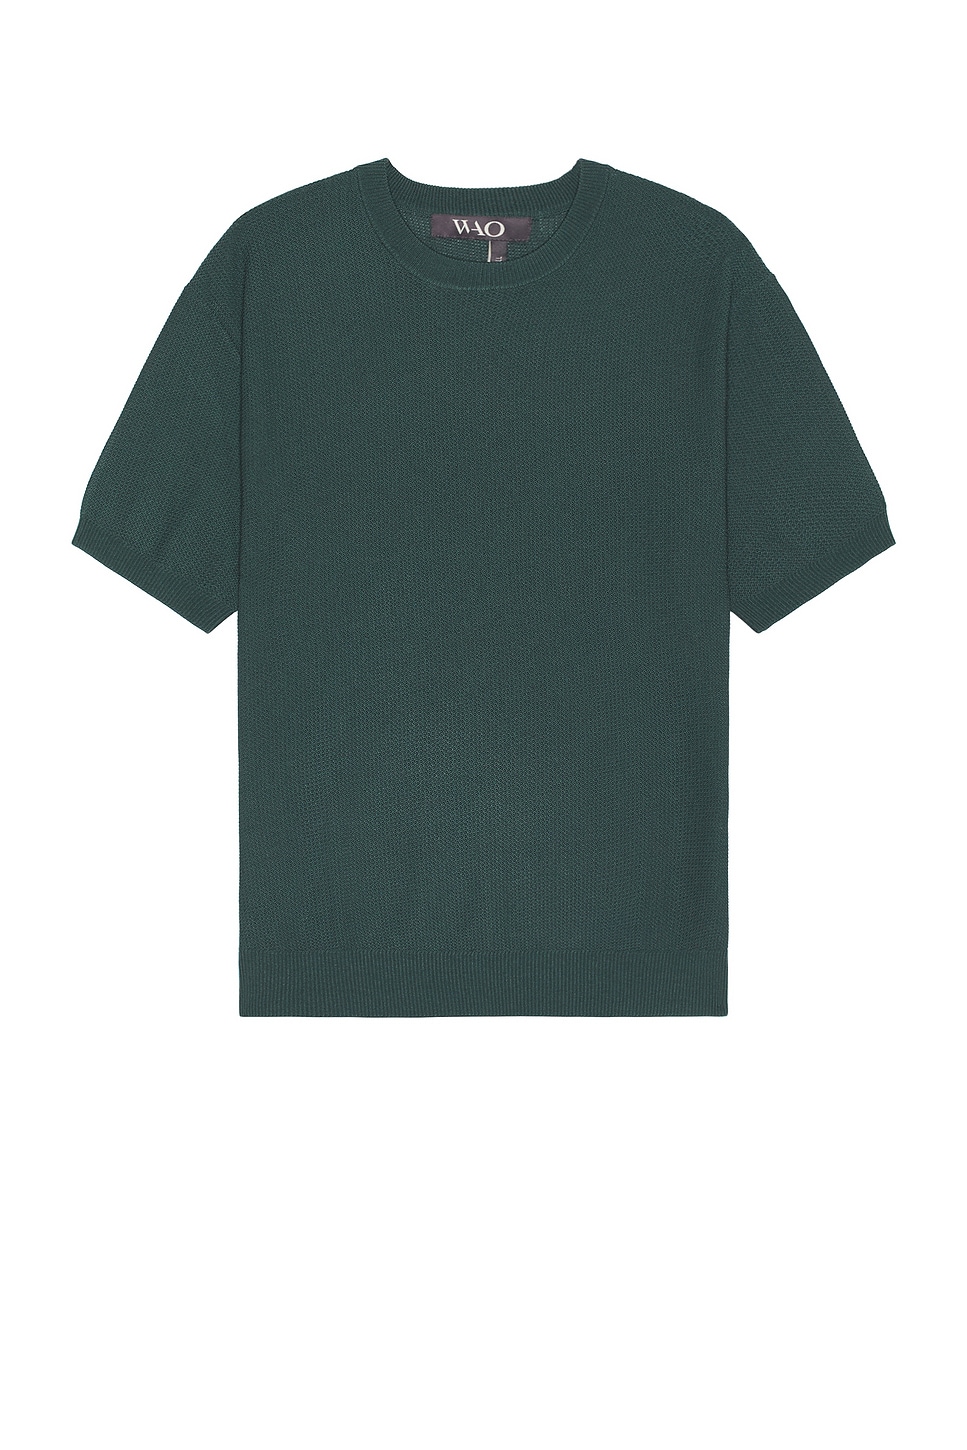 Image 1 of WAO Textured Knit Tee in Mint